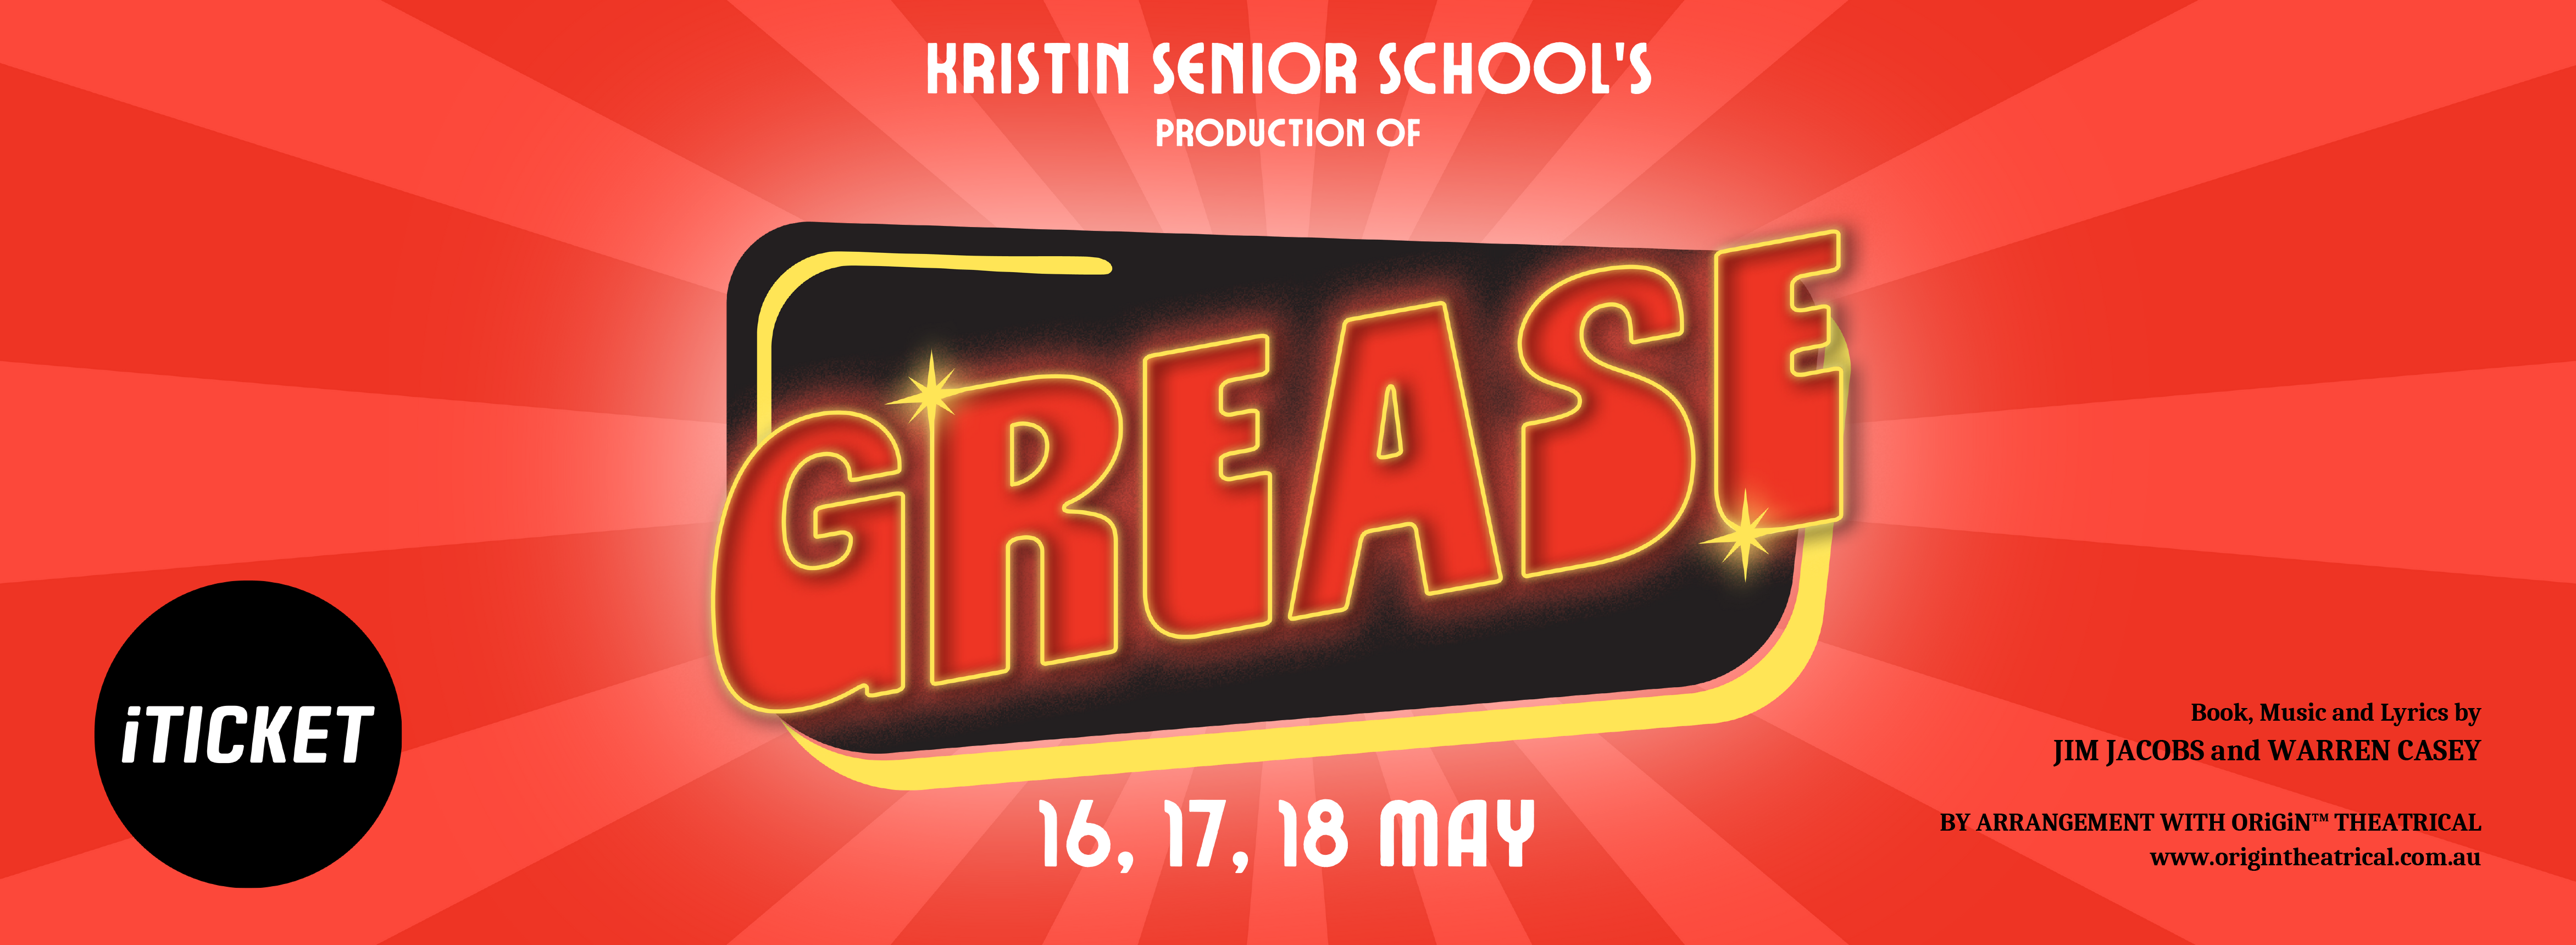 Kristin Senior School's production of Grease - 16, 17, 18 May - book at iTicket